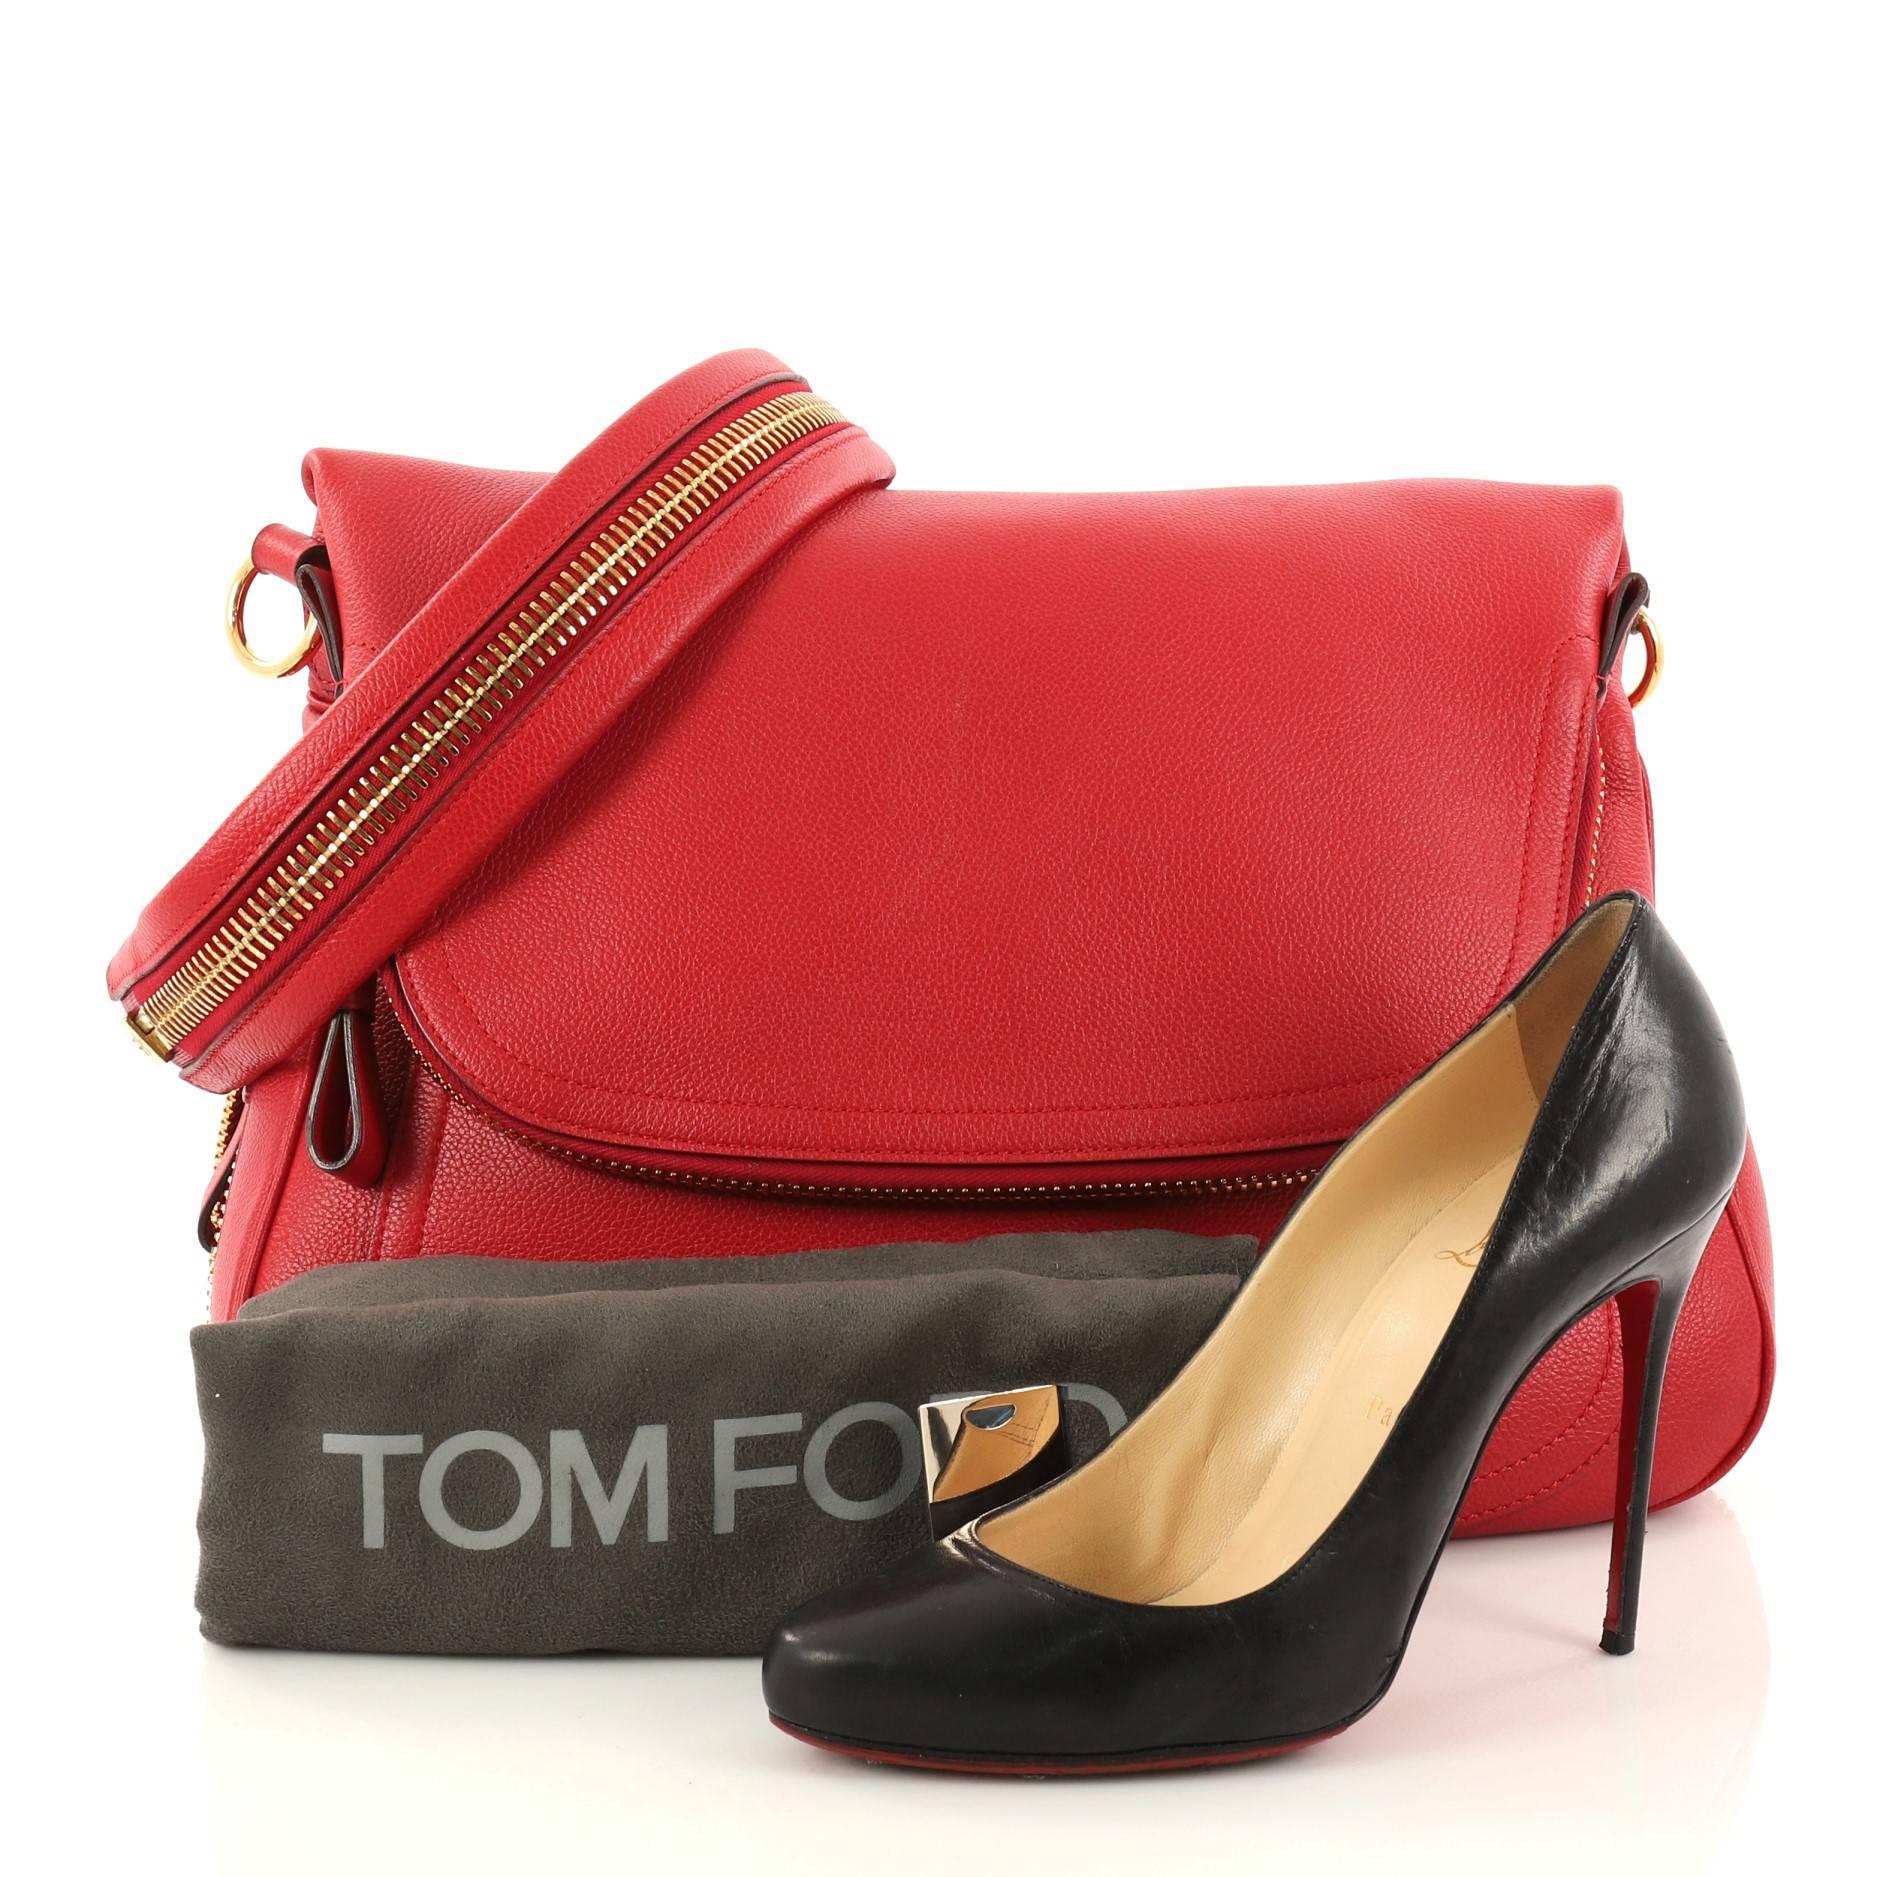 This authentic Tom Ford Jennifer Shoulder Bag Leather Medium redefines modern luxury with timeless elegance. Crafted in red leather, this signature saddle shoulder bag features an adjustable leather shoulder strap, zip top fold-over flap, expandable